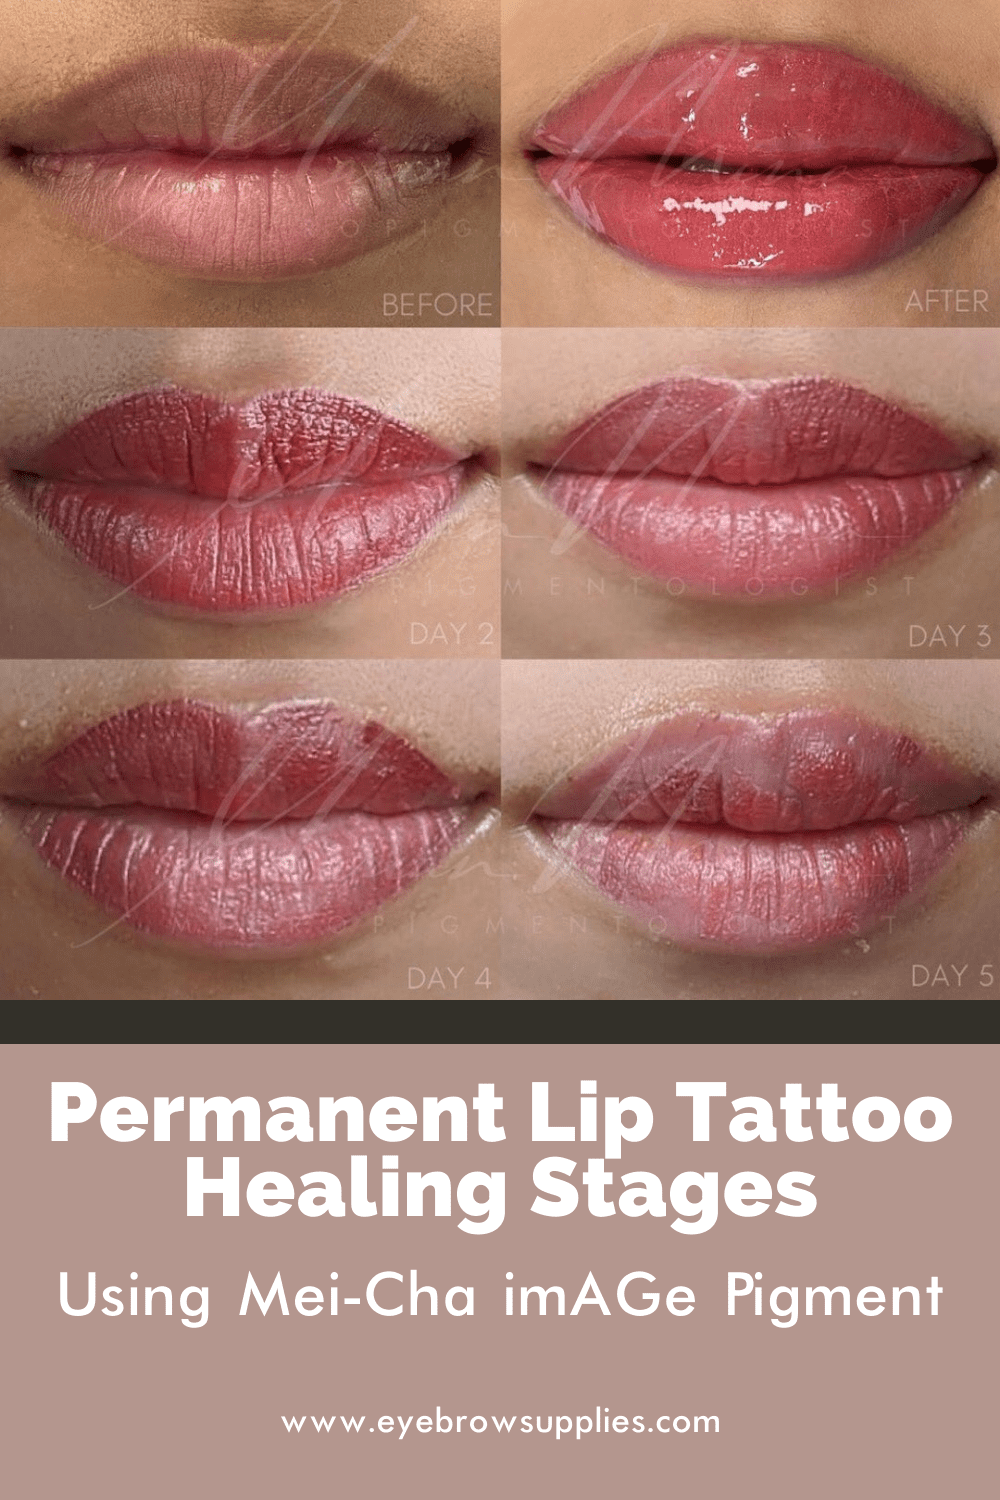 Permanent Lip Tattoo Healing Stages